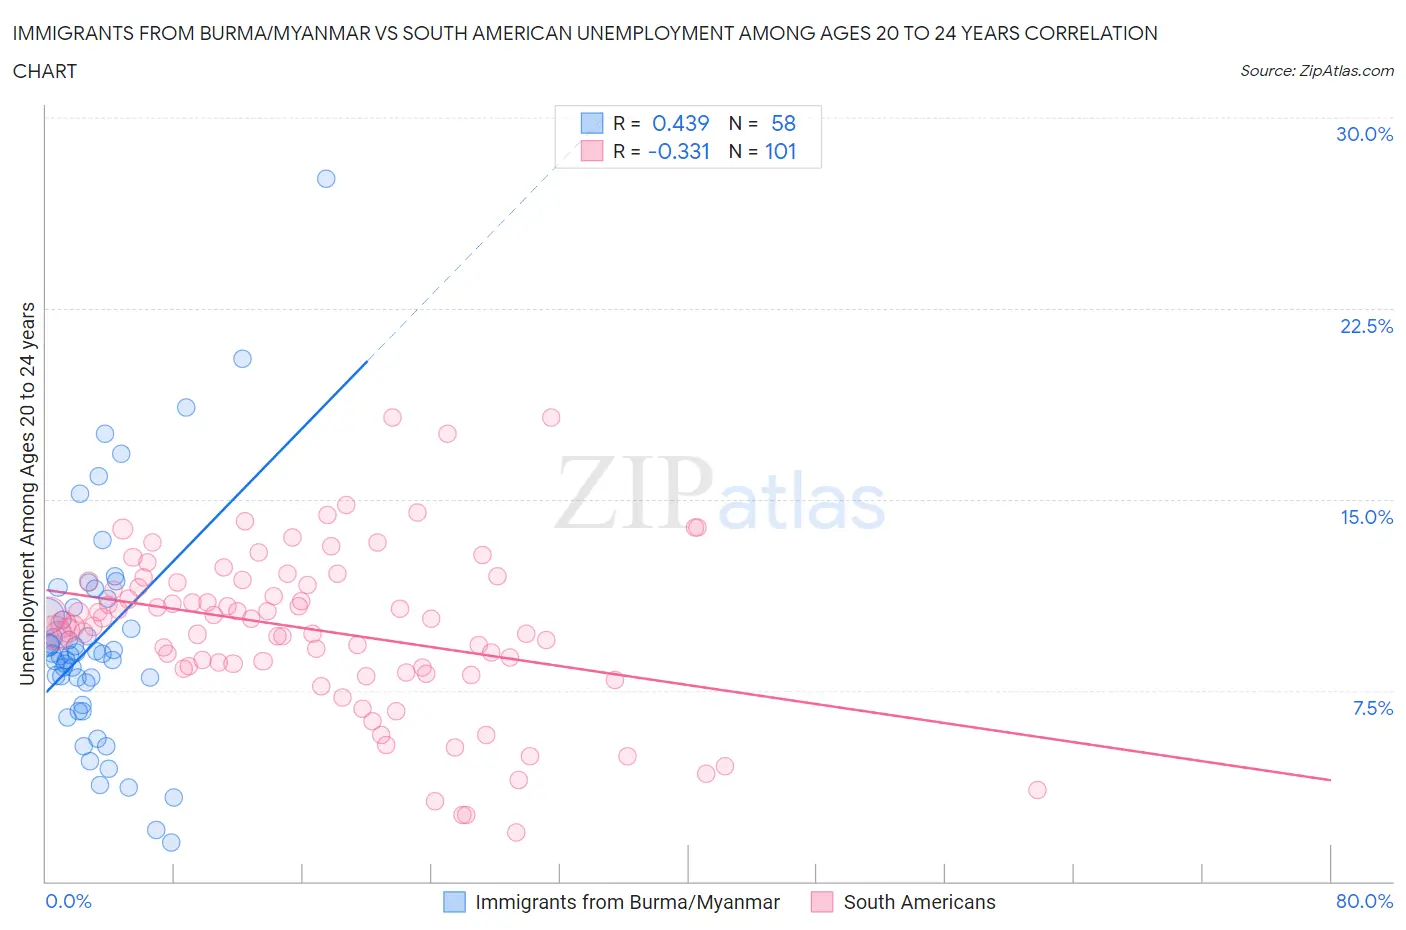 Immigrants from Burma/Myanmar vs South American Unemployment Among Ages 20 to 24 years